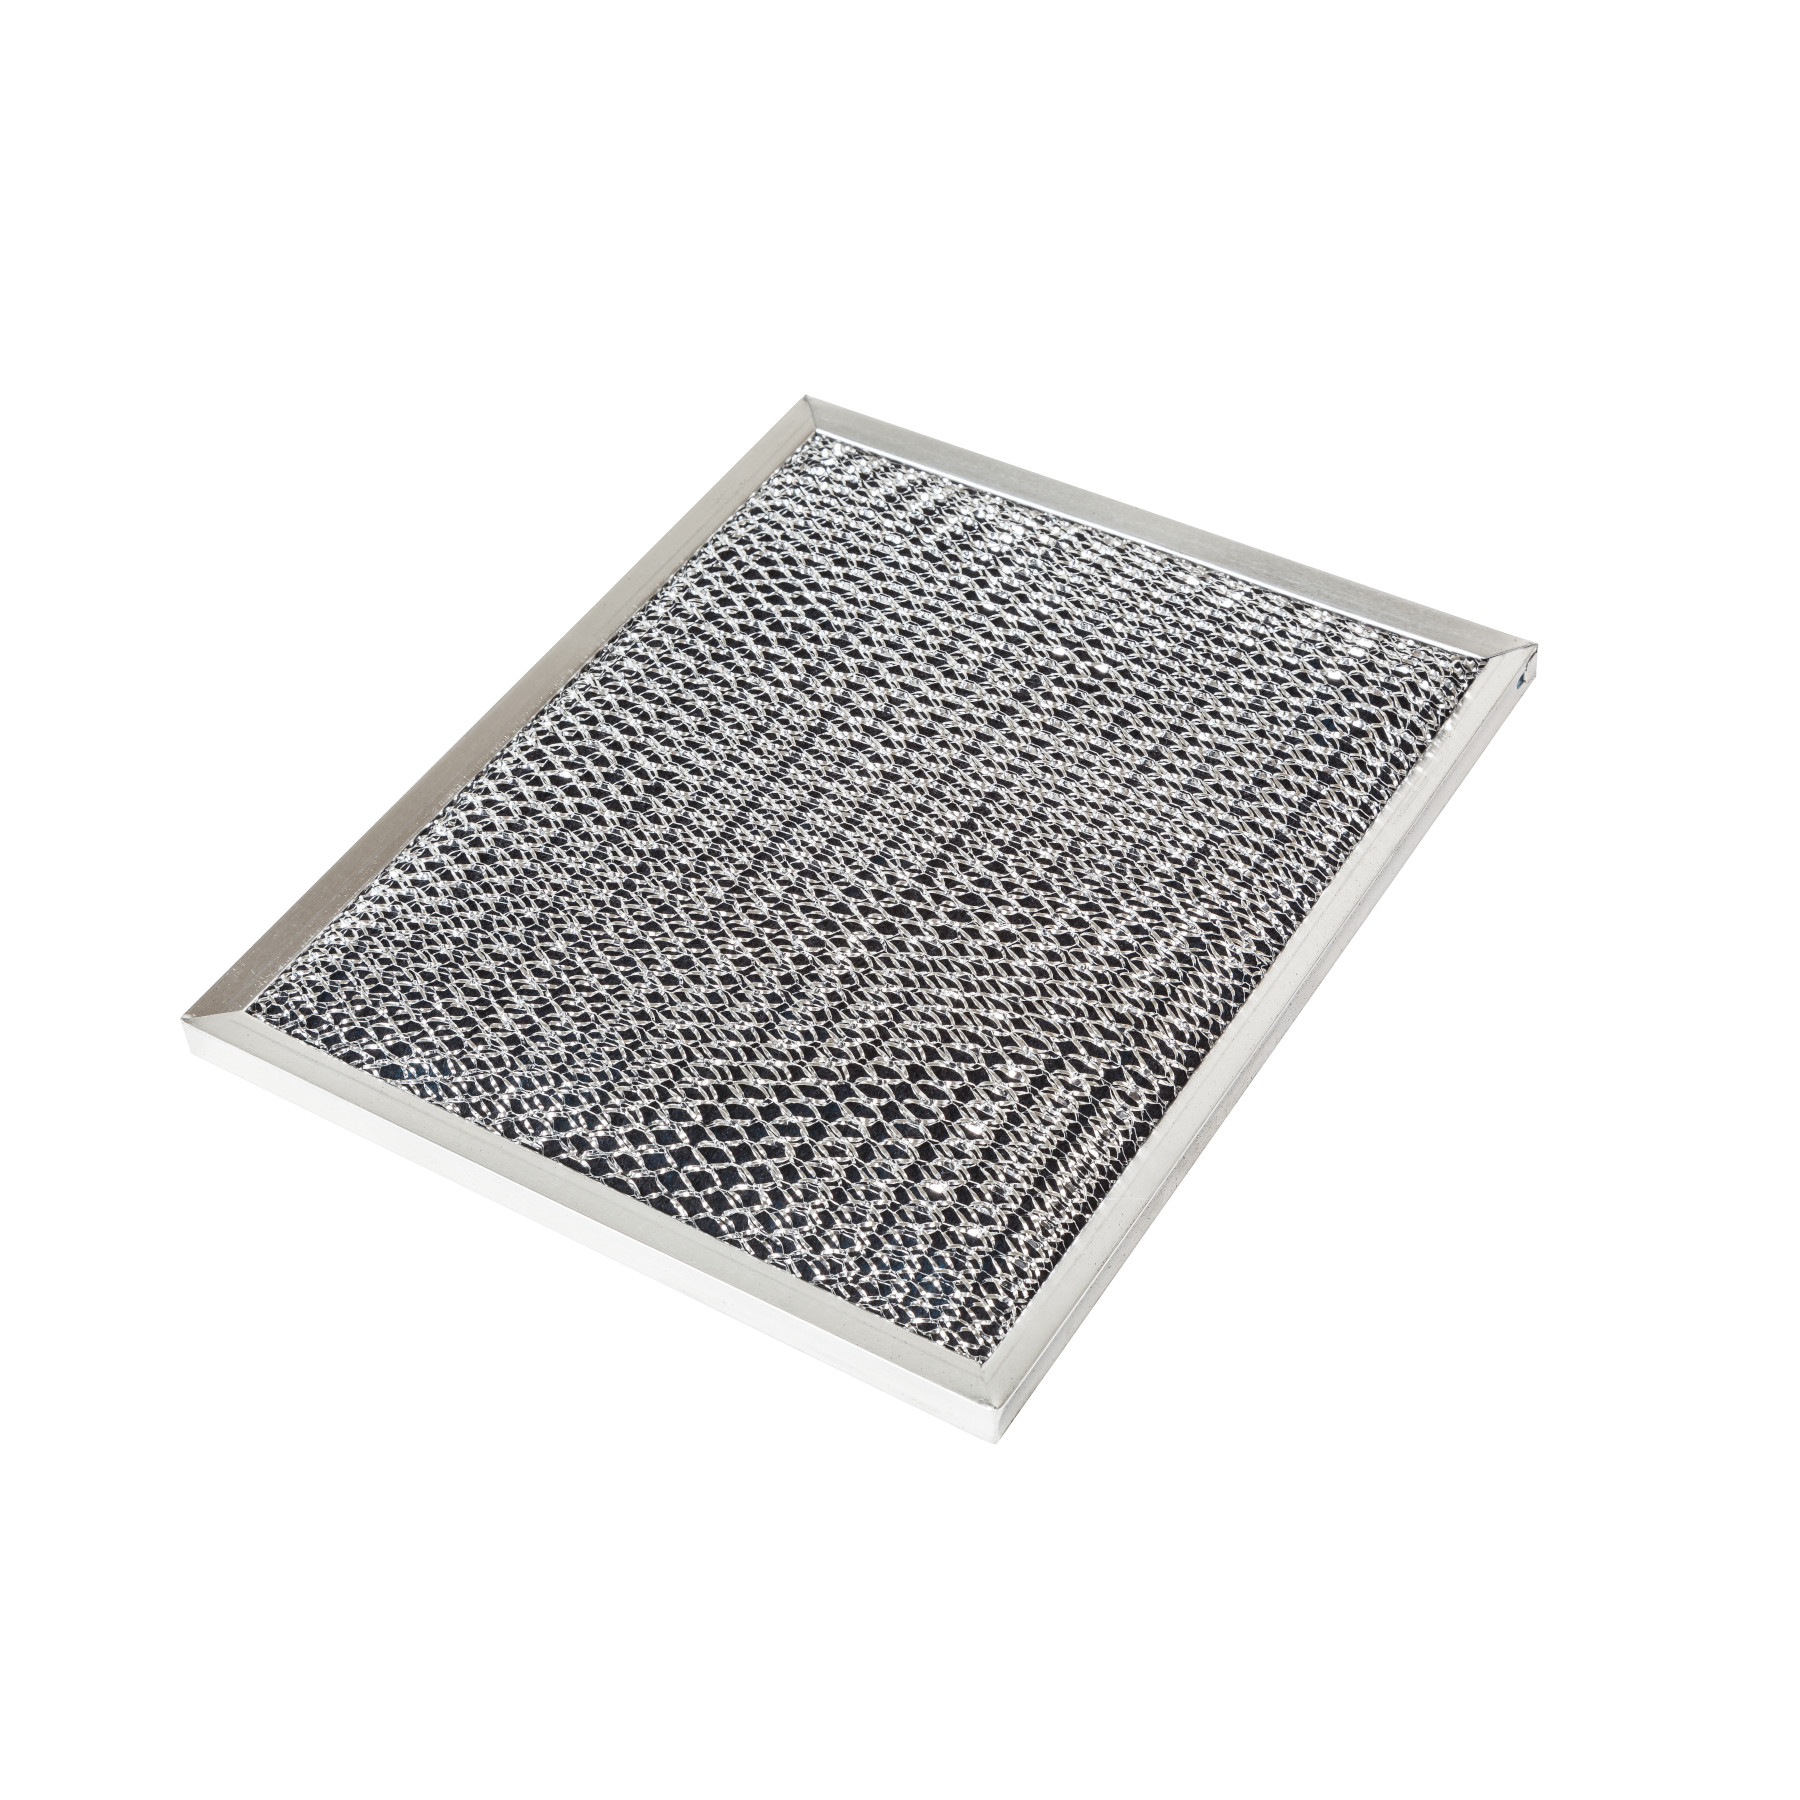 Broan Aluminum Mesh Vent Filter Replacement For Nutone Range Hoods 8.75x10.5in 